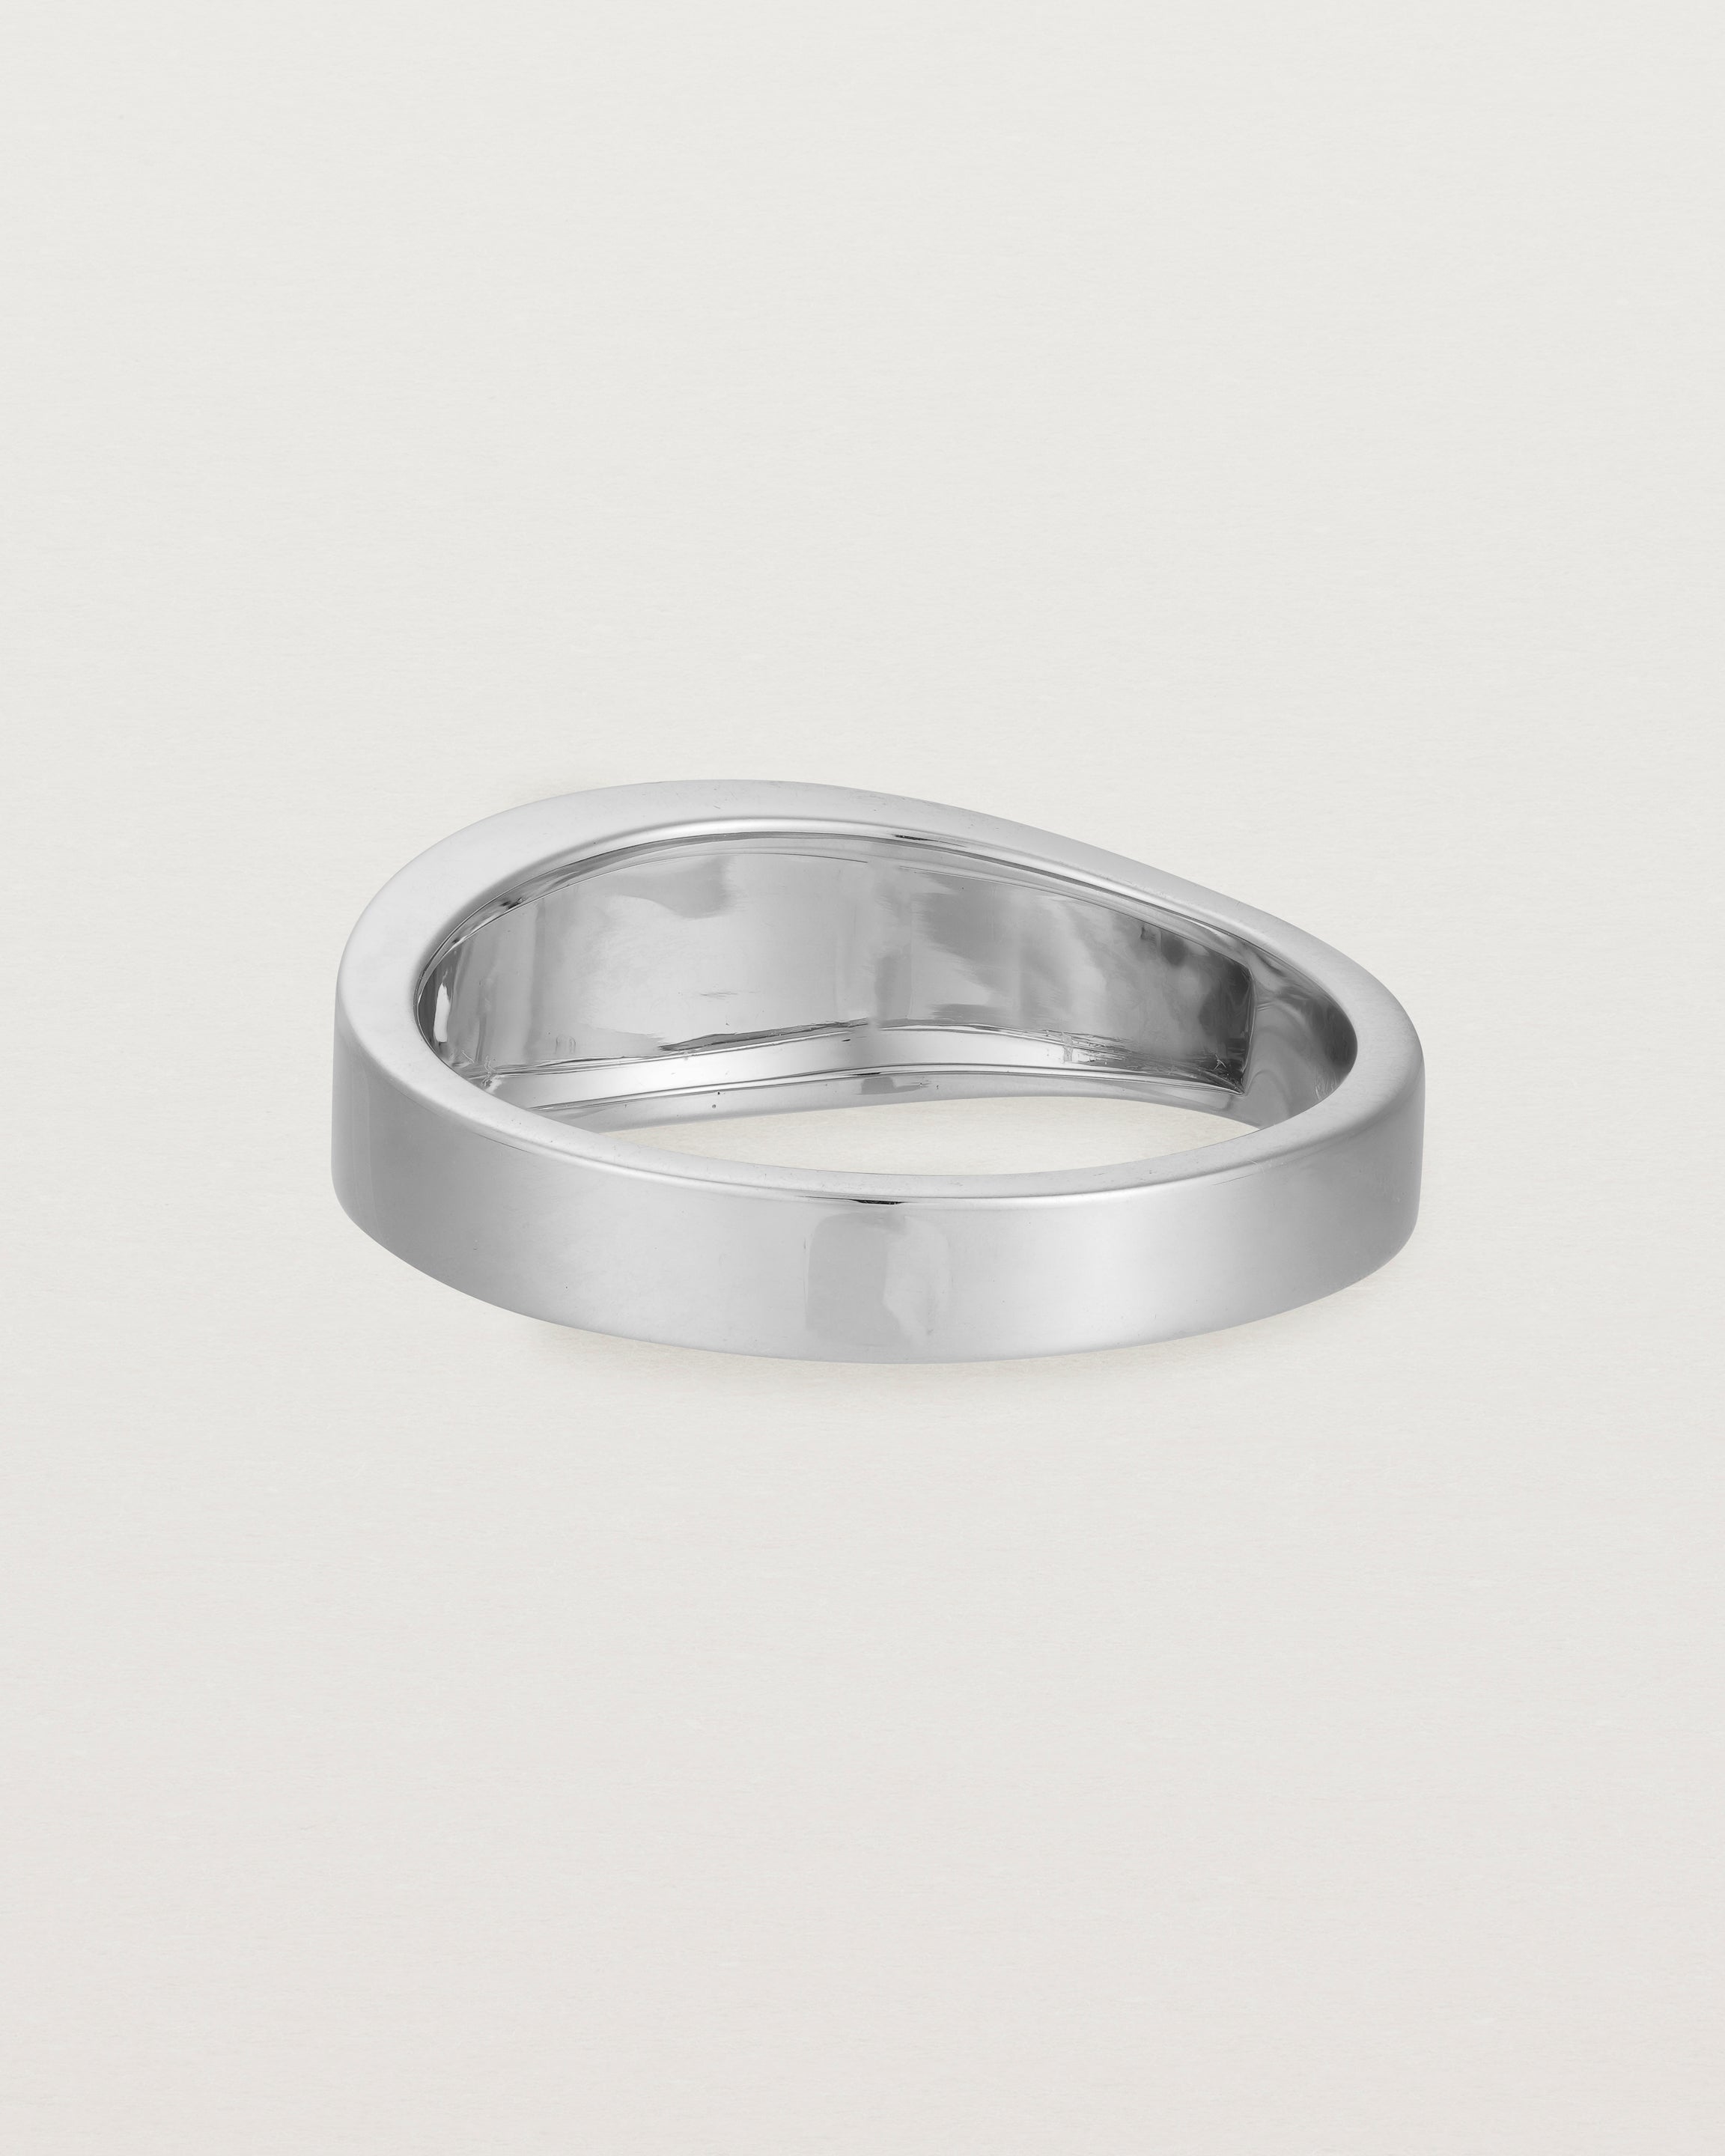 Back view of the Amos Ring in Sterling Silver.